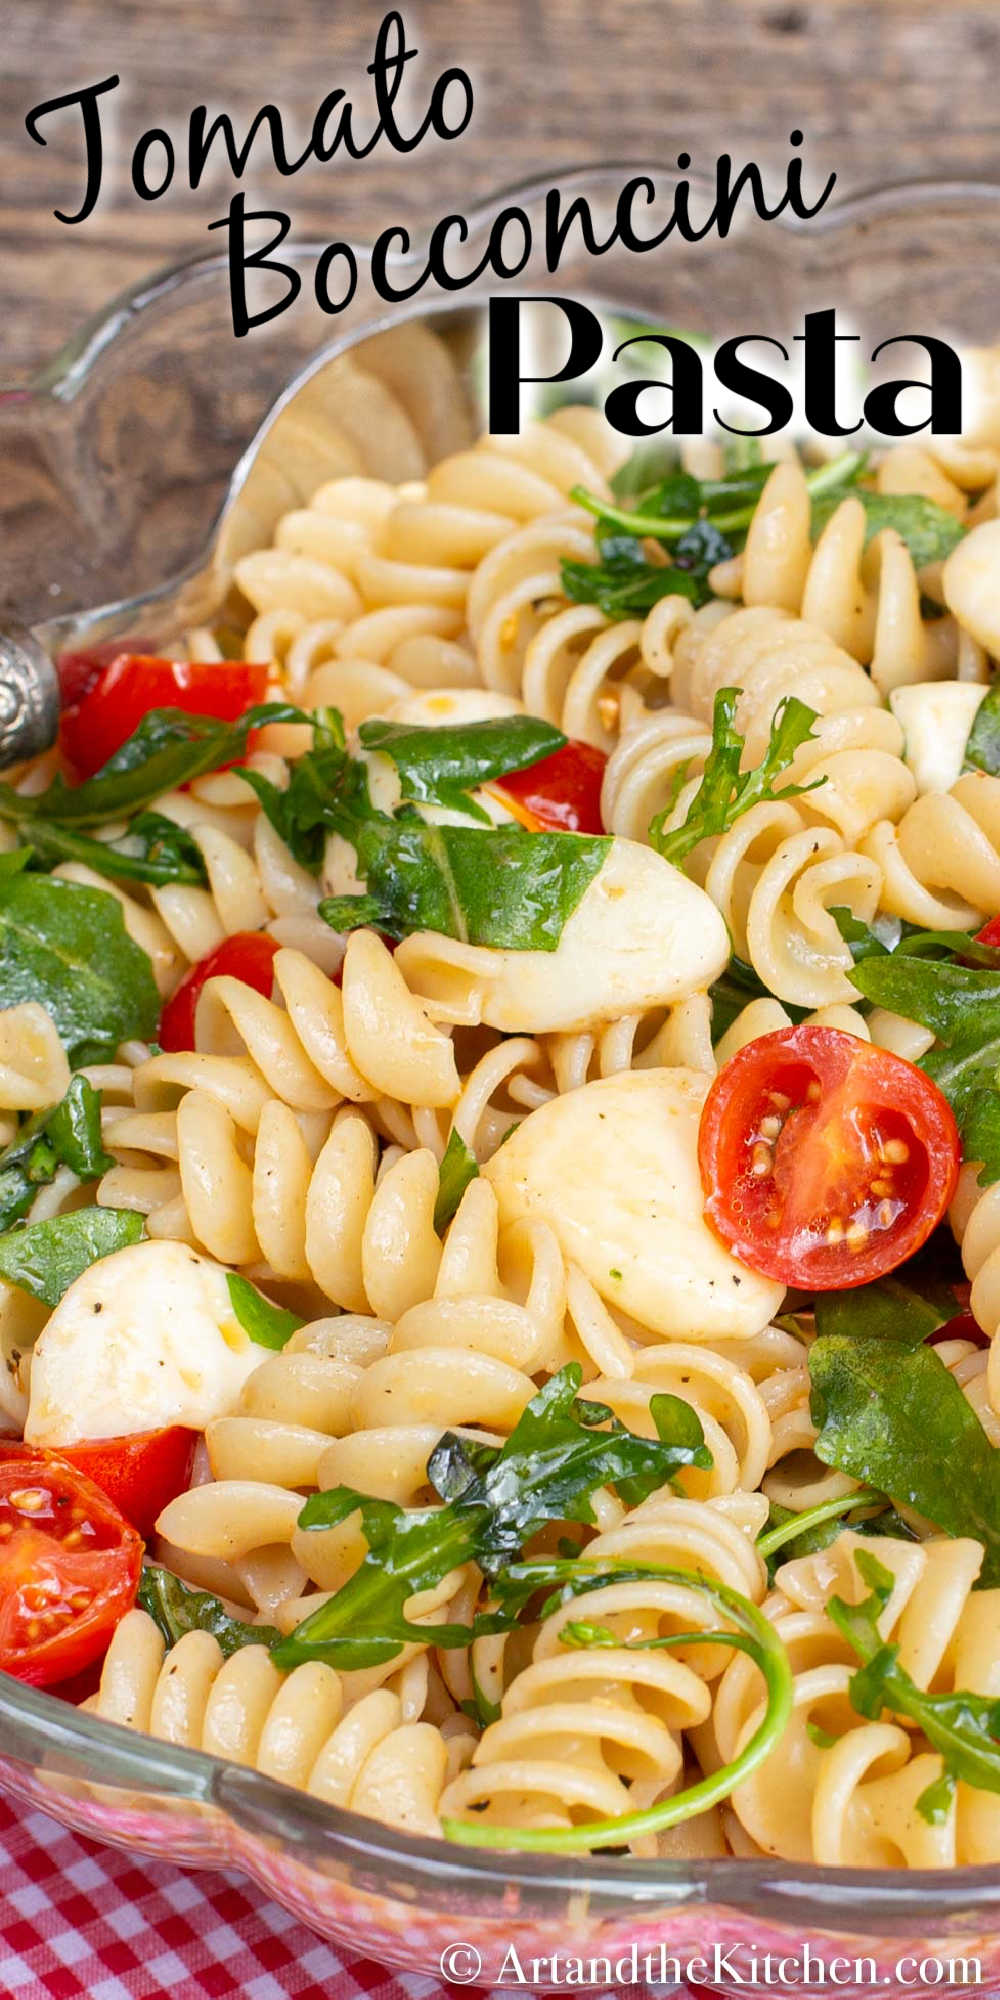 Tomato Bocconcini Pasta is a quick and simple recipe made with rotini pasta tossed together with bocconcini, garden fresh cherry tomatoes, arugula, and fresh basil. via @artandthekitch